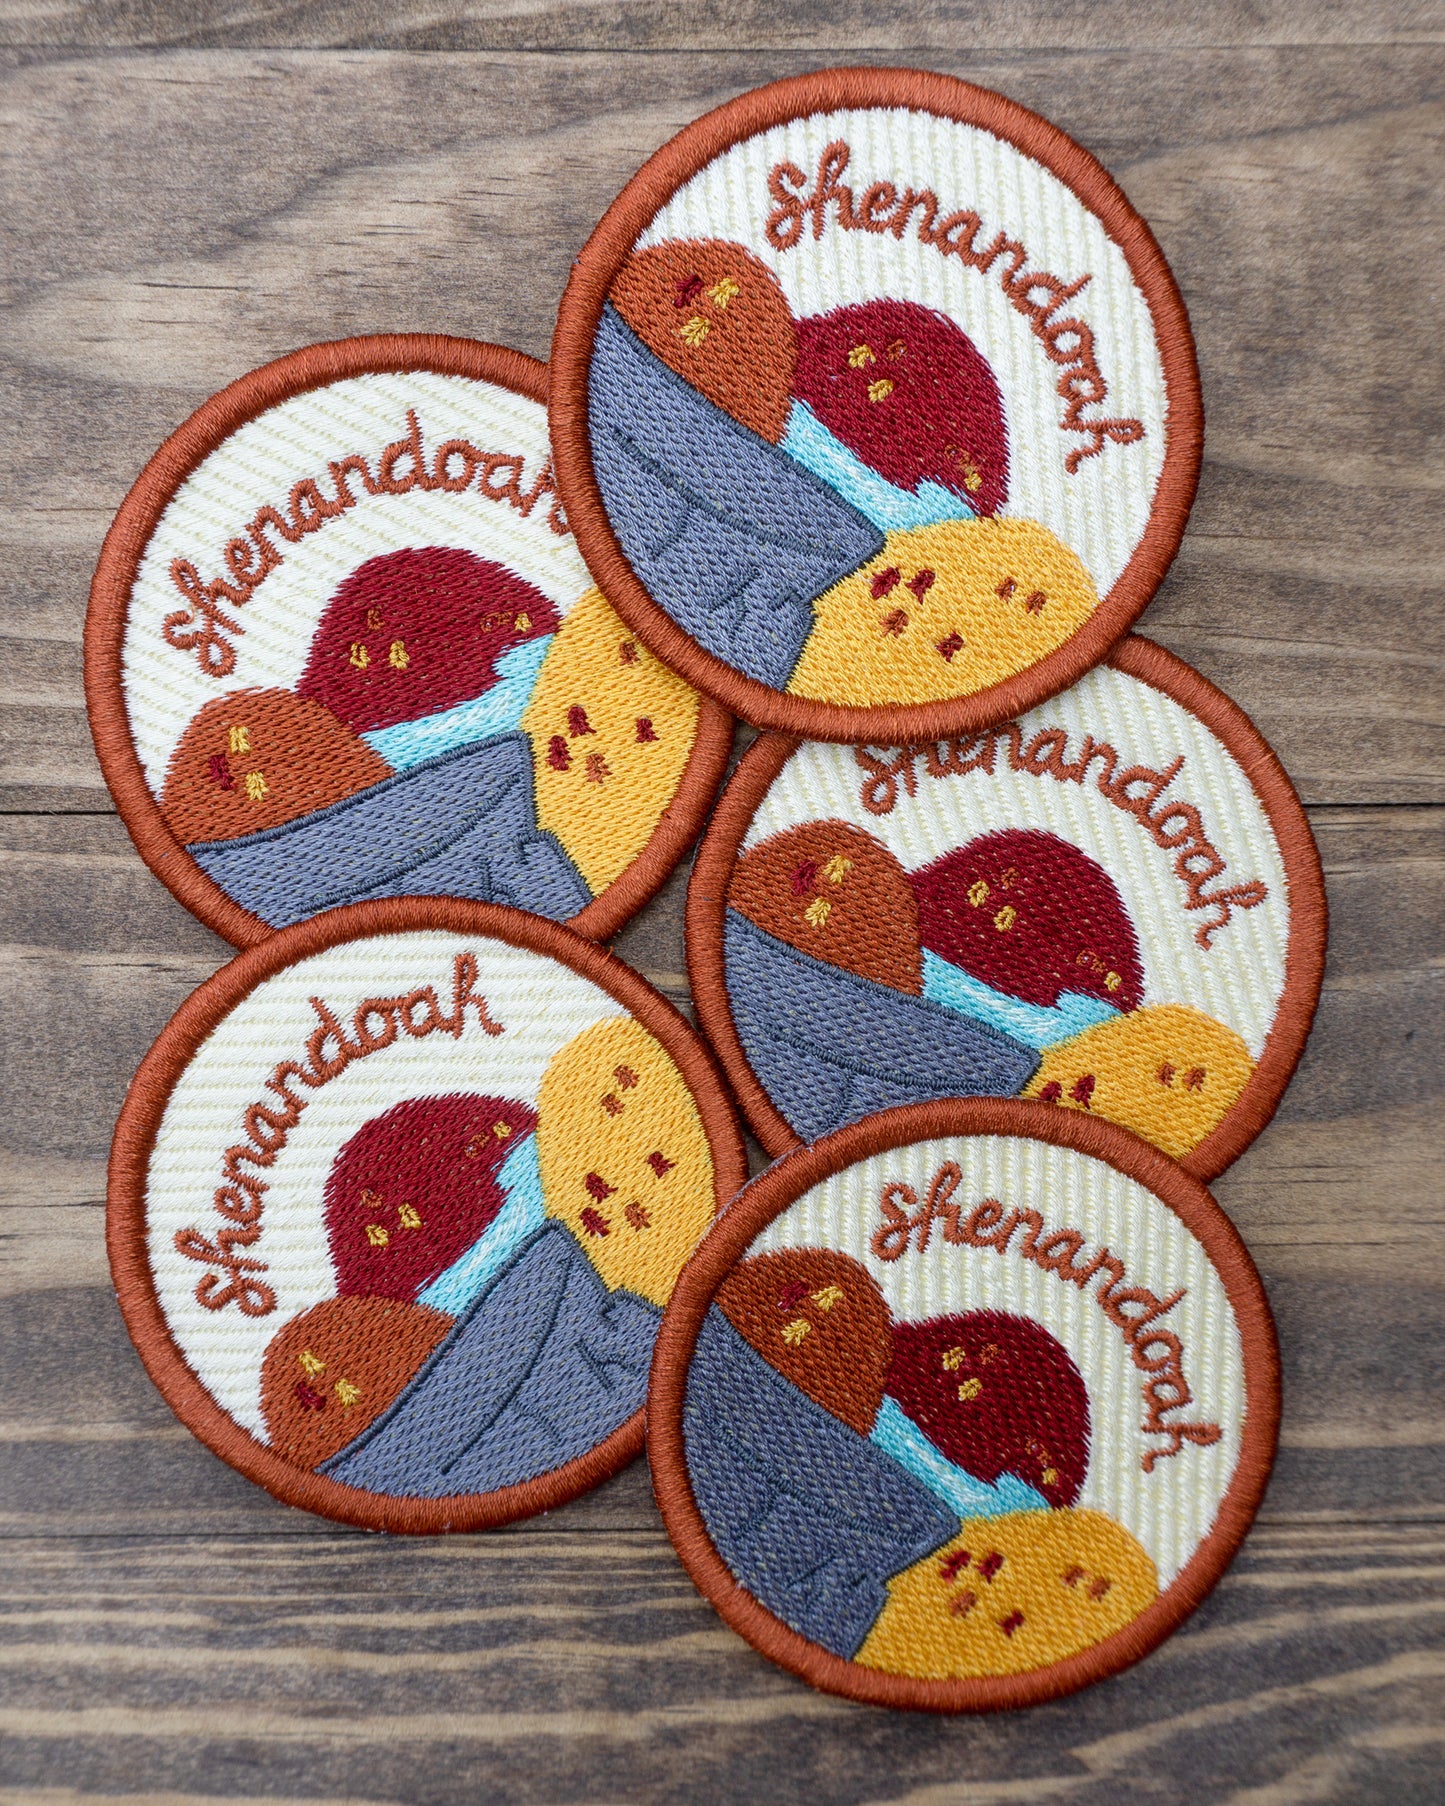 Shenandoah Embroidered Patch